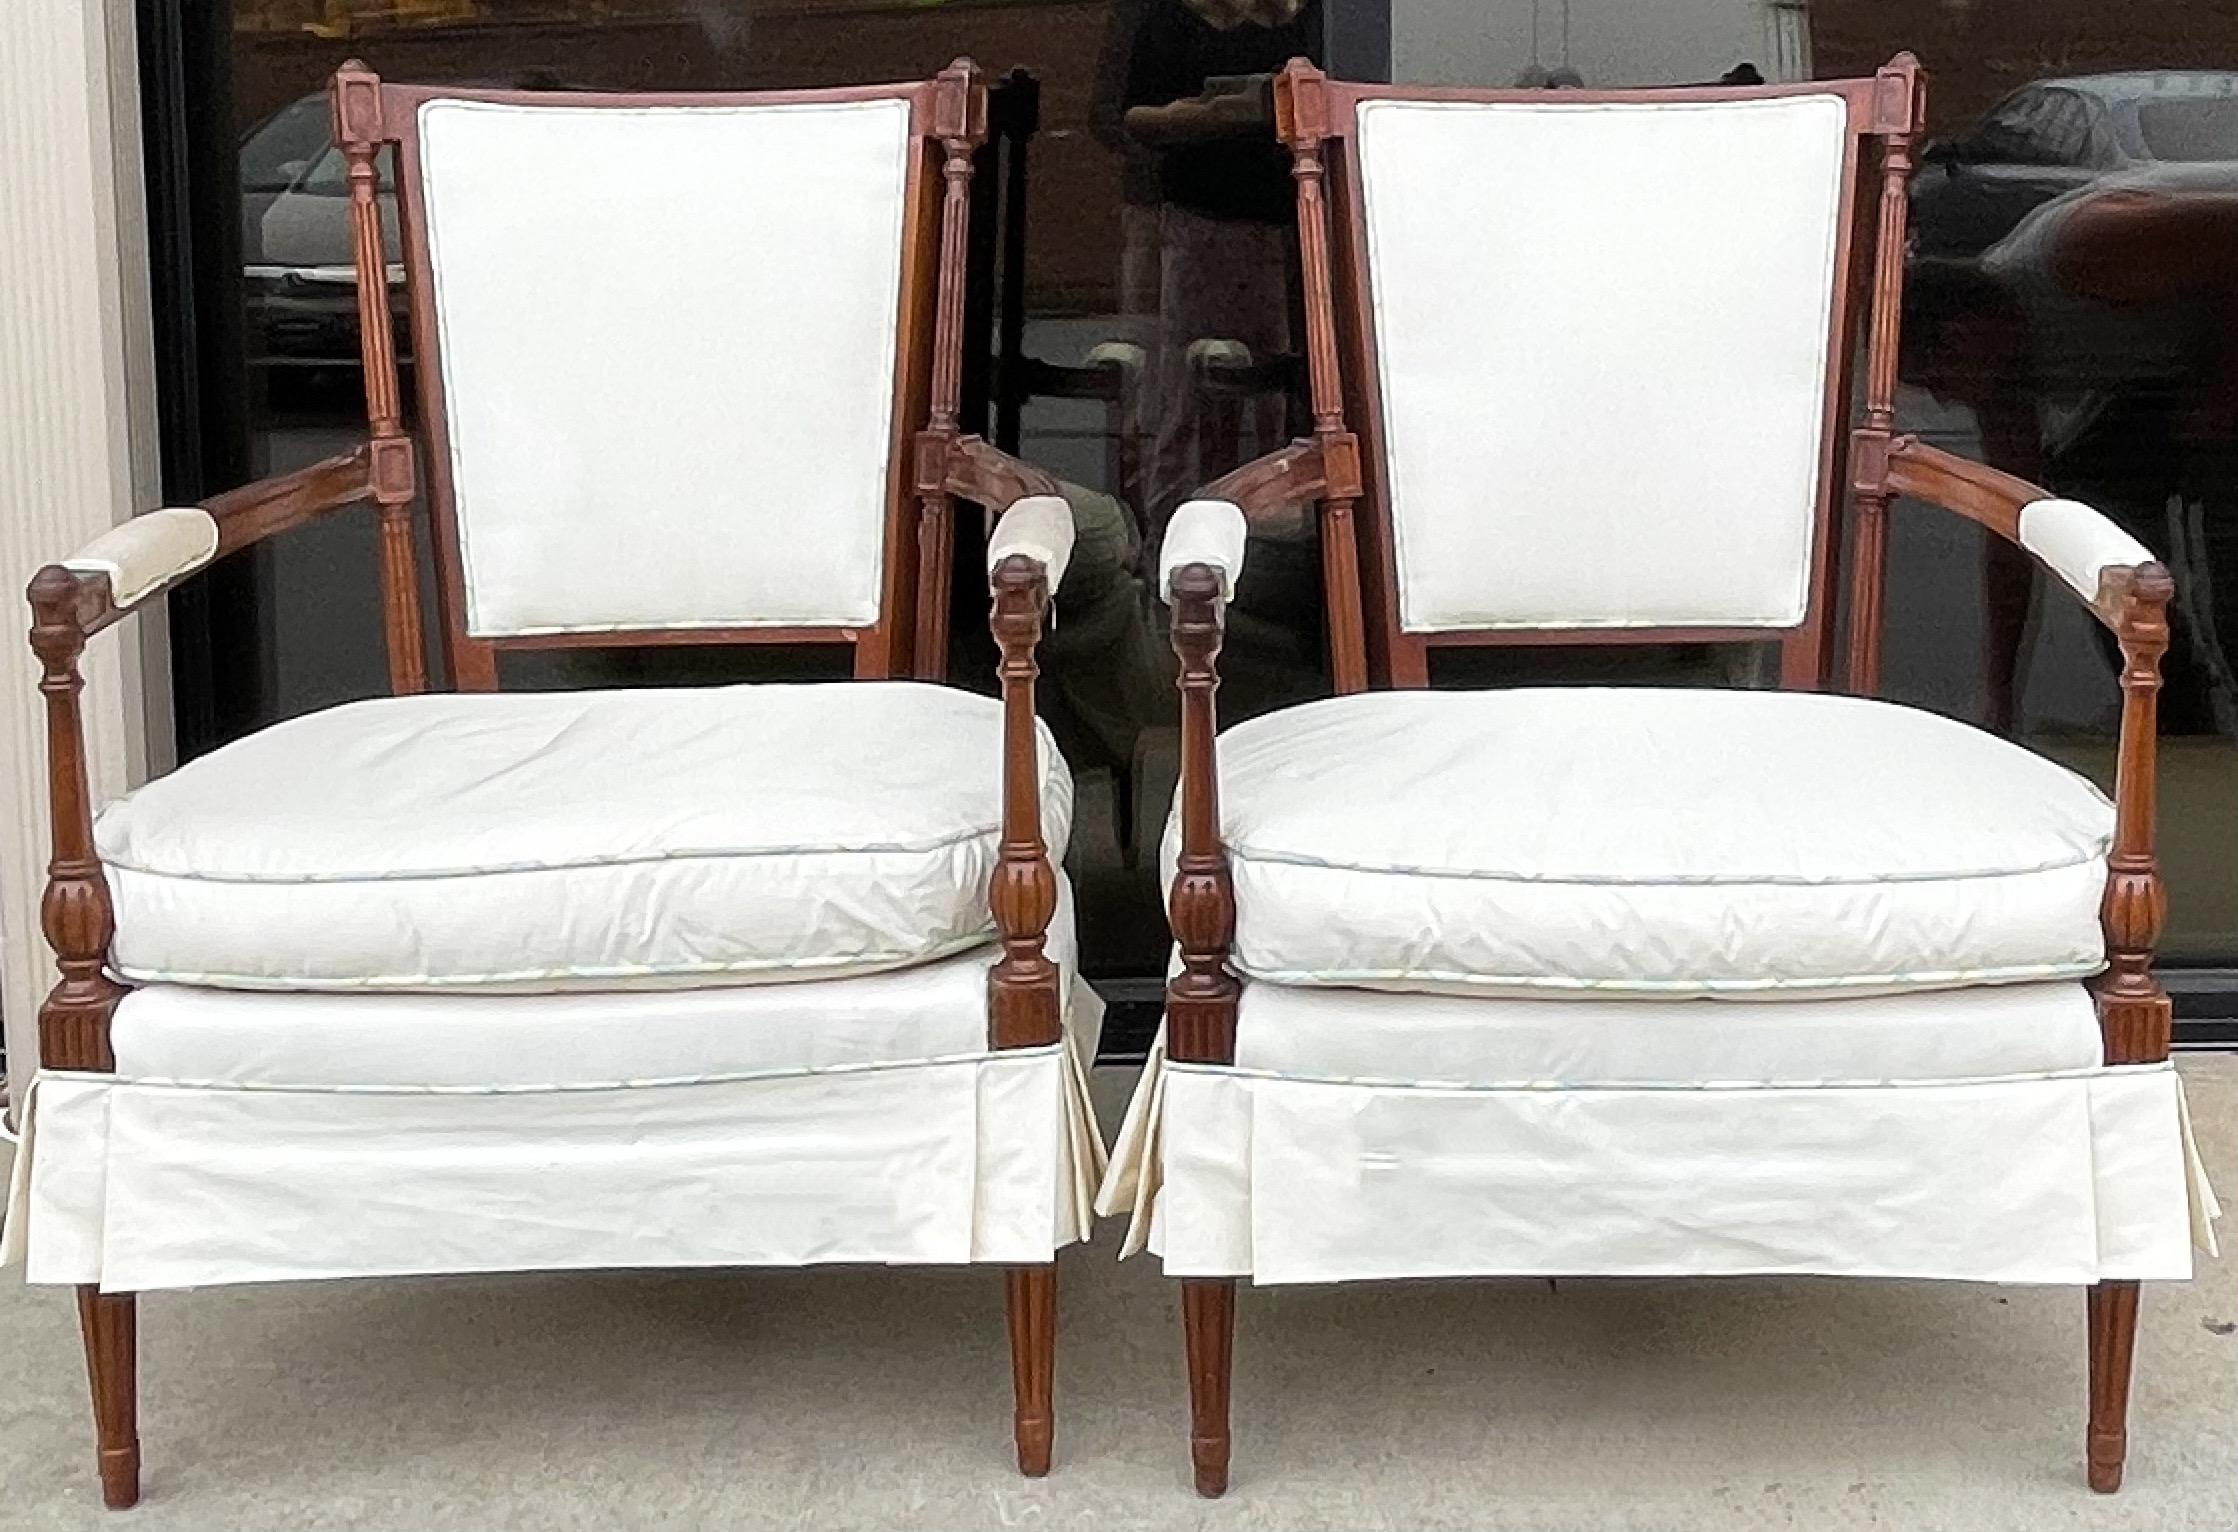 Too cute to leave behind! This is a pair of French style carved mahogany skirted bergere chairs. The attention to detail in the upholstery is not common any more. The ivory upholstery has plaid contrast welting. The arm covers could use replacing.